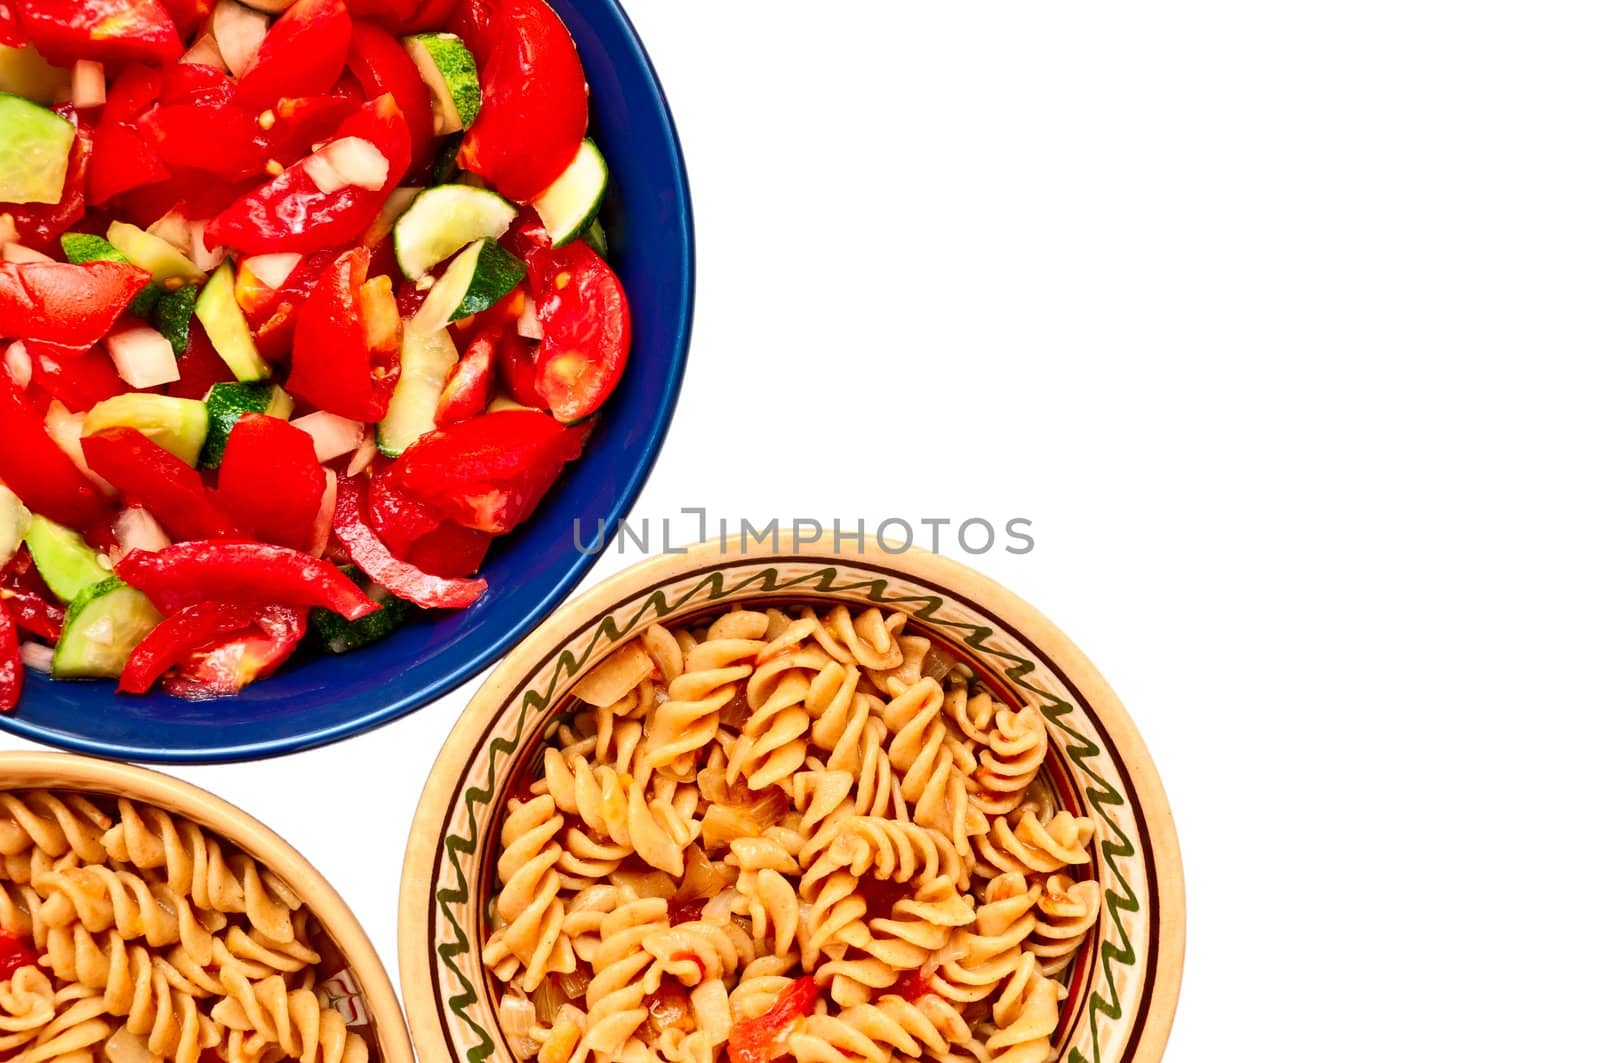 A bowl of salad and two plates with pasta with tomatoes, isolated on white background